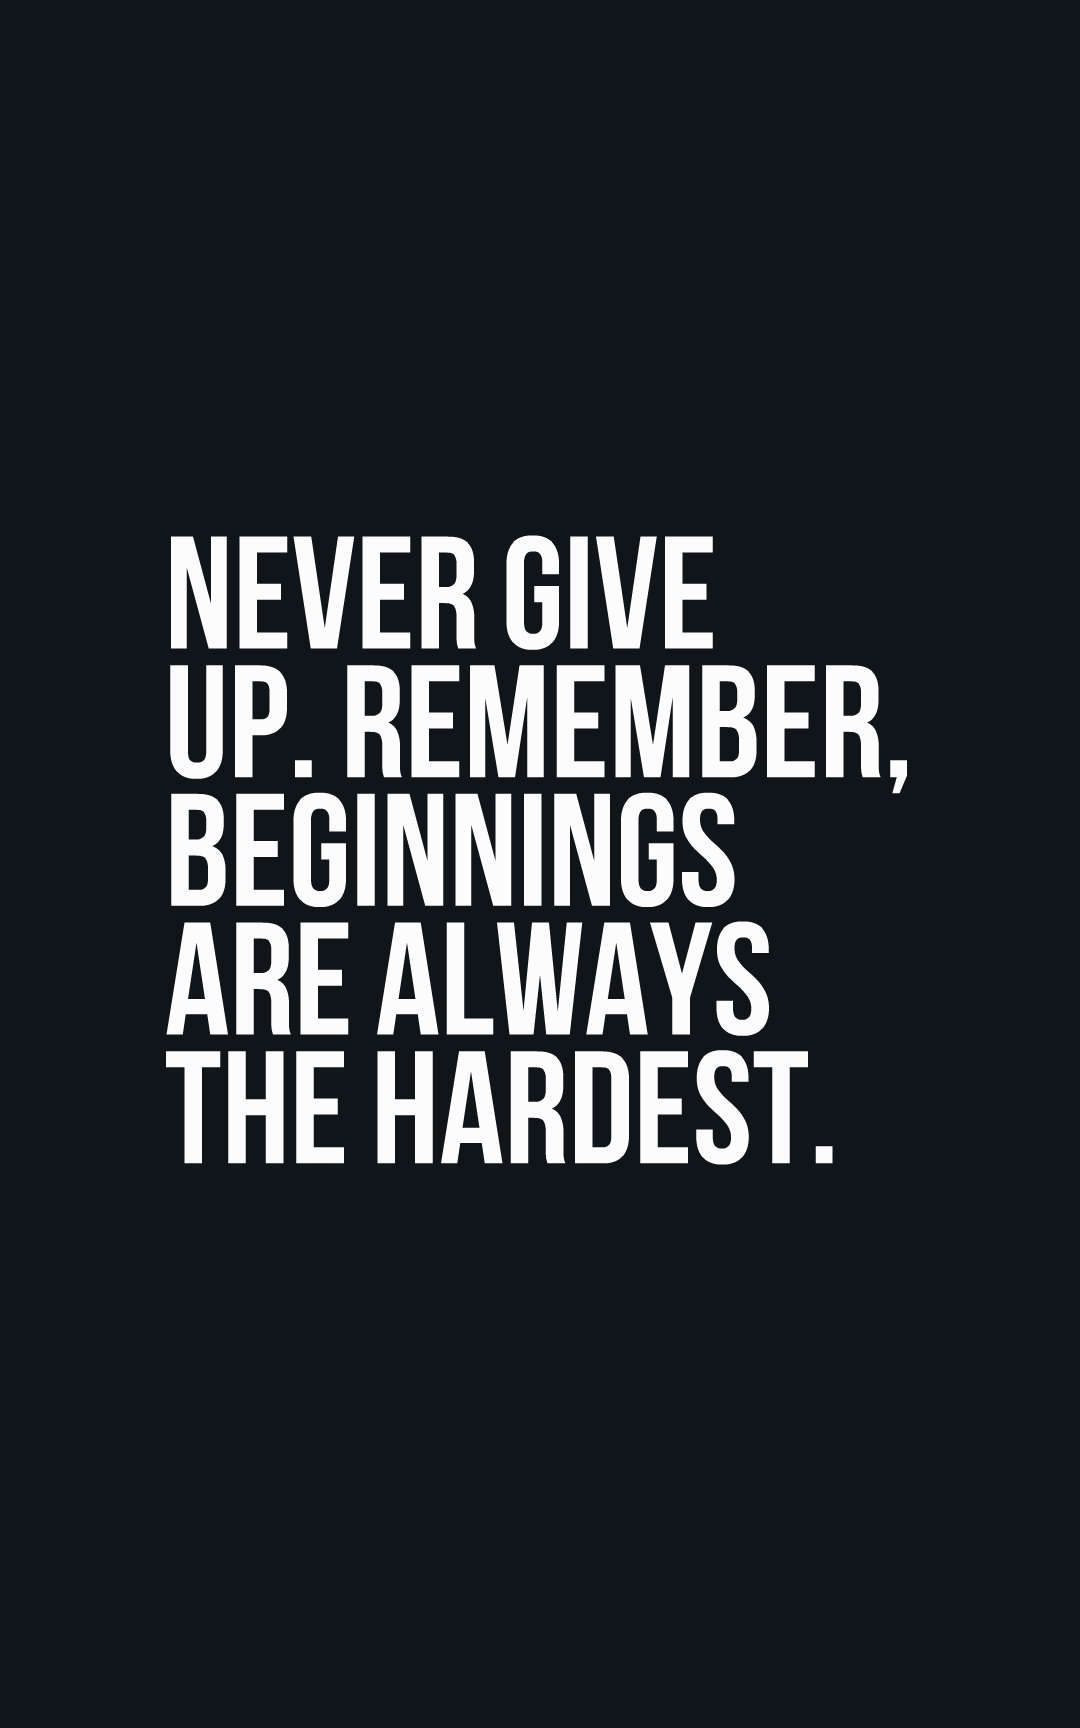 Never give up. Remember, beginnings are always the hardest.